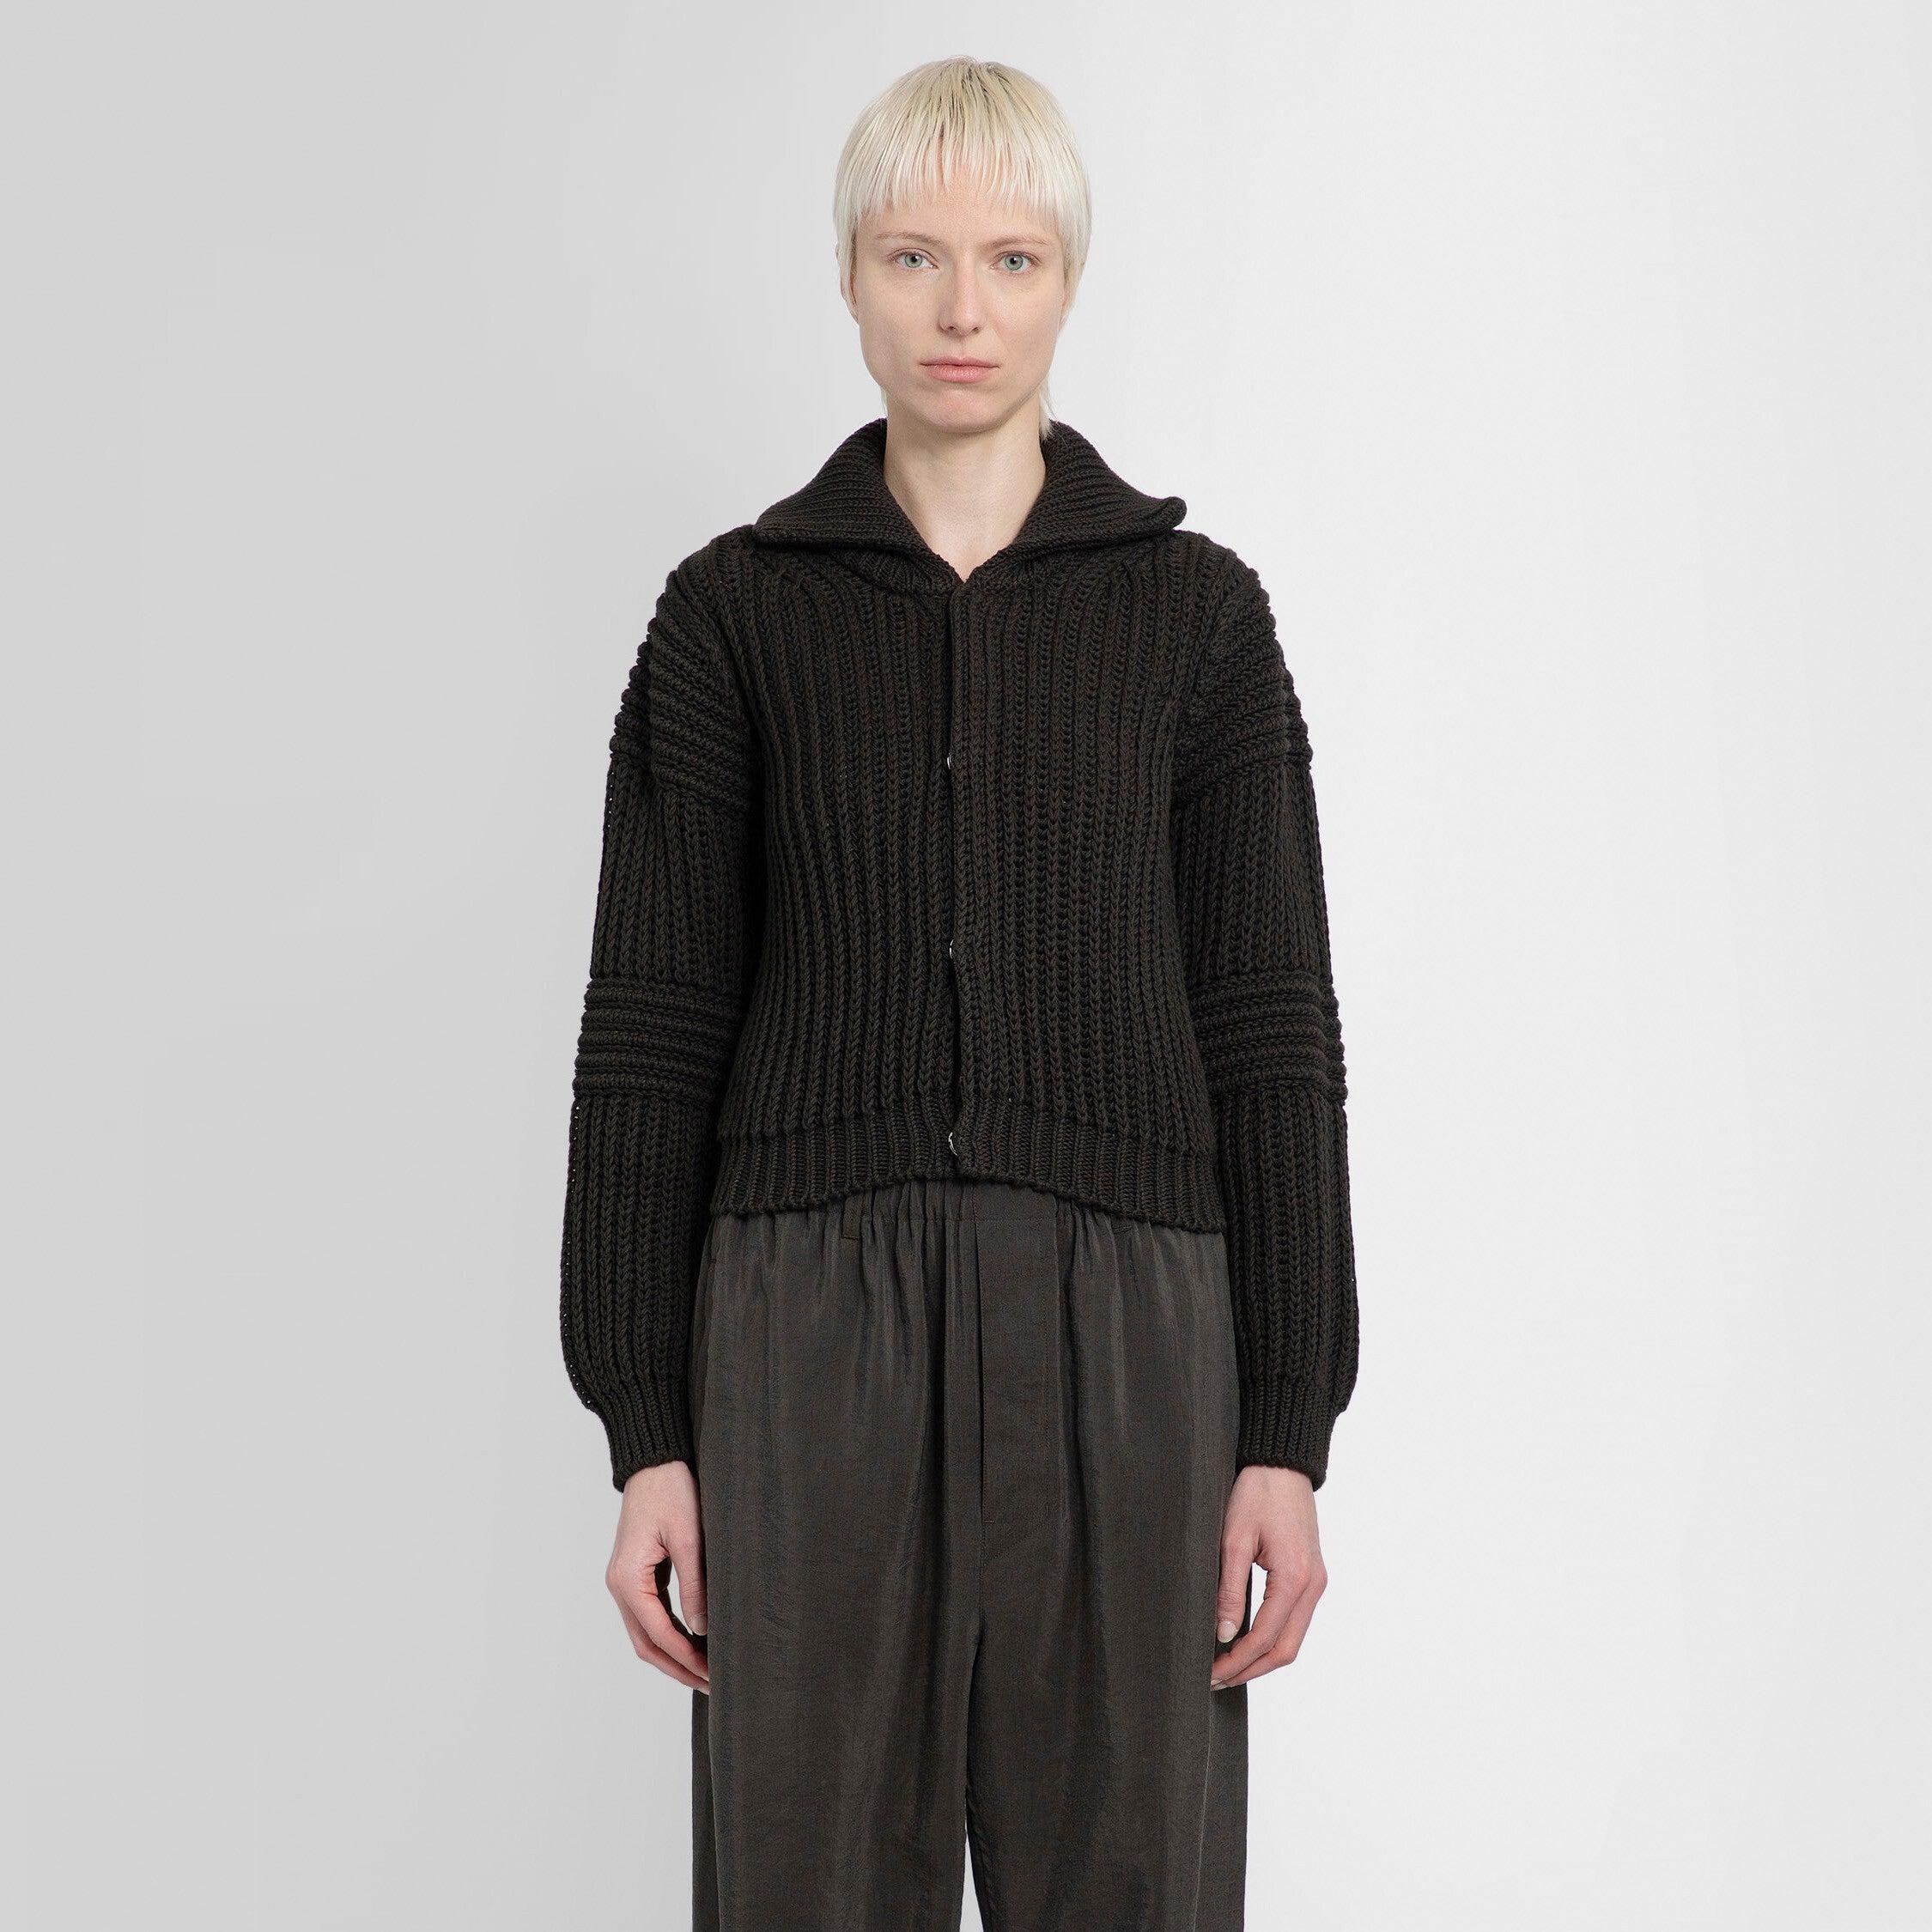 LEMAIRE WOMAN BLACK KNITWEAR by LEMAIRE